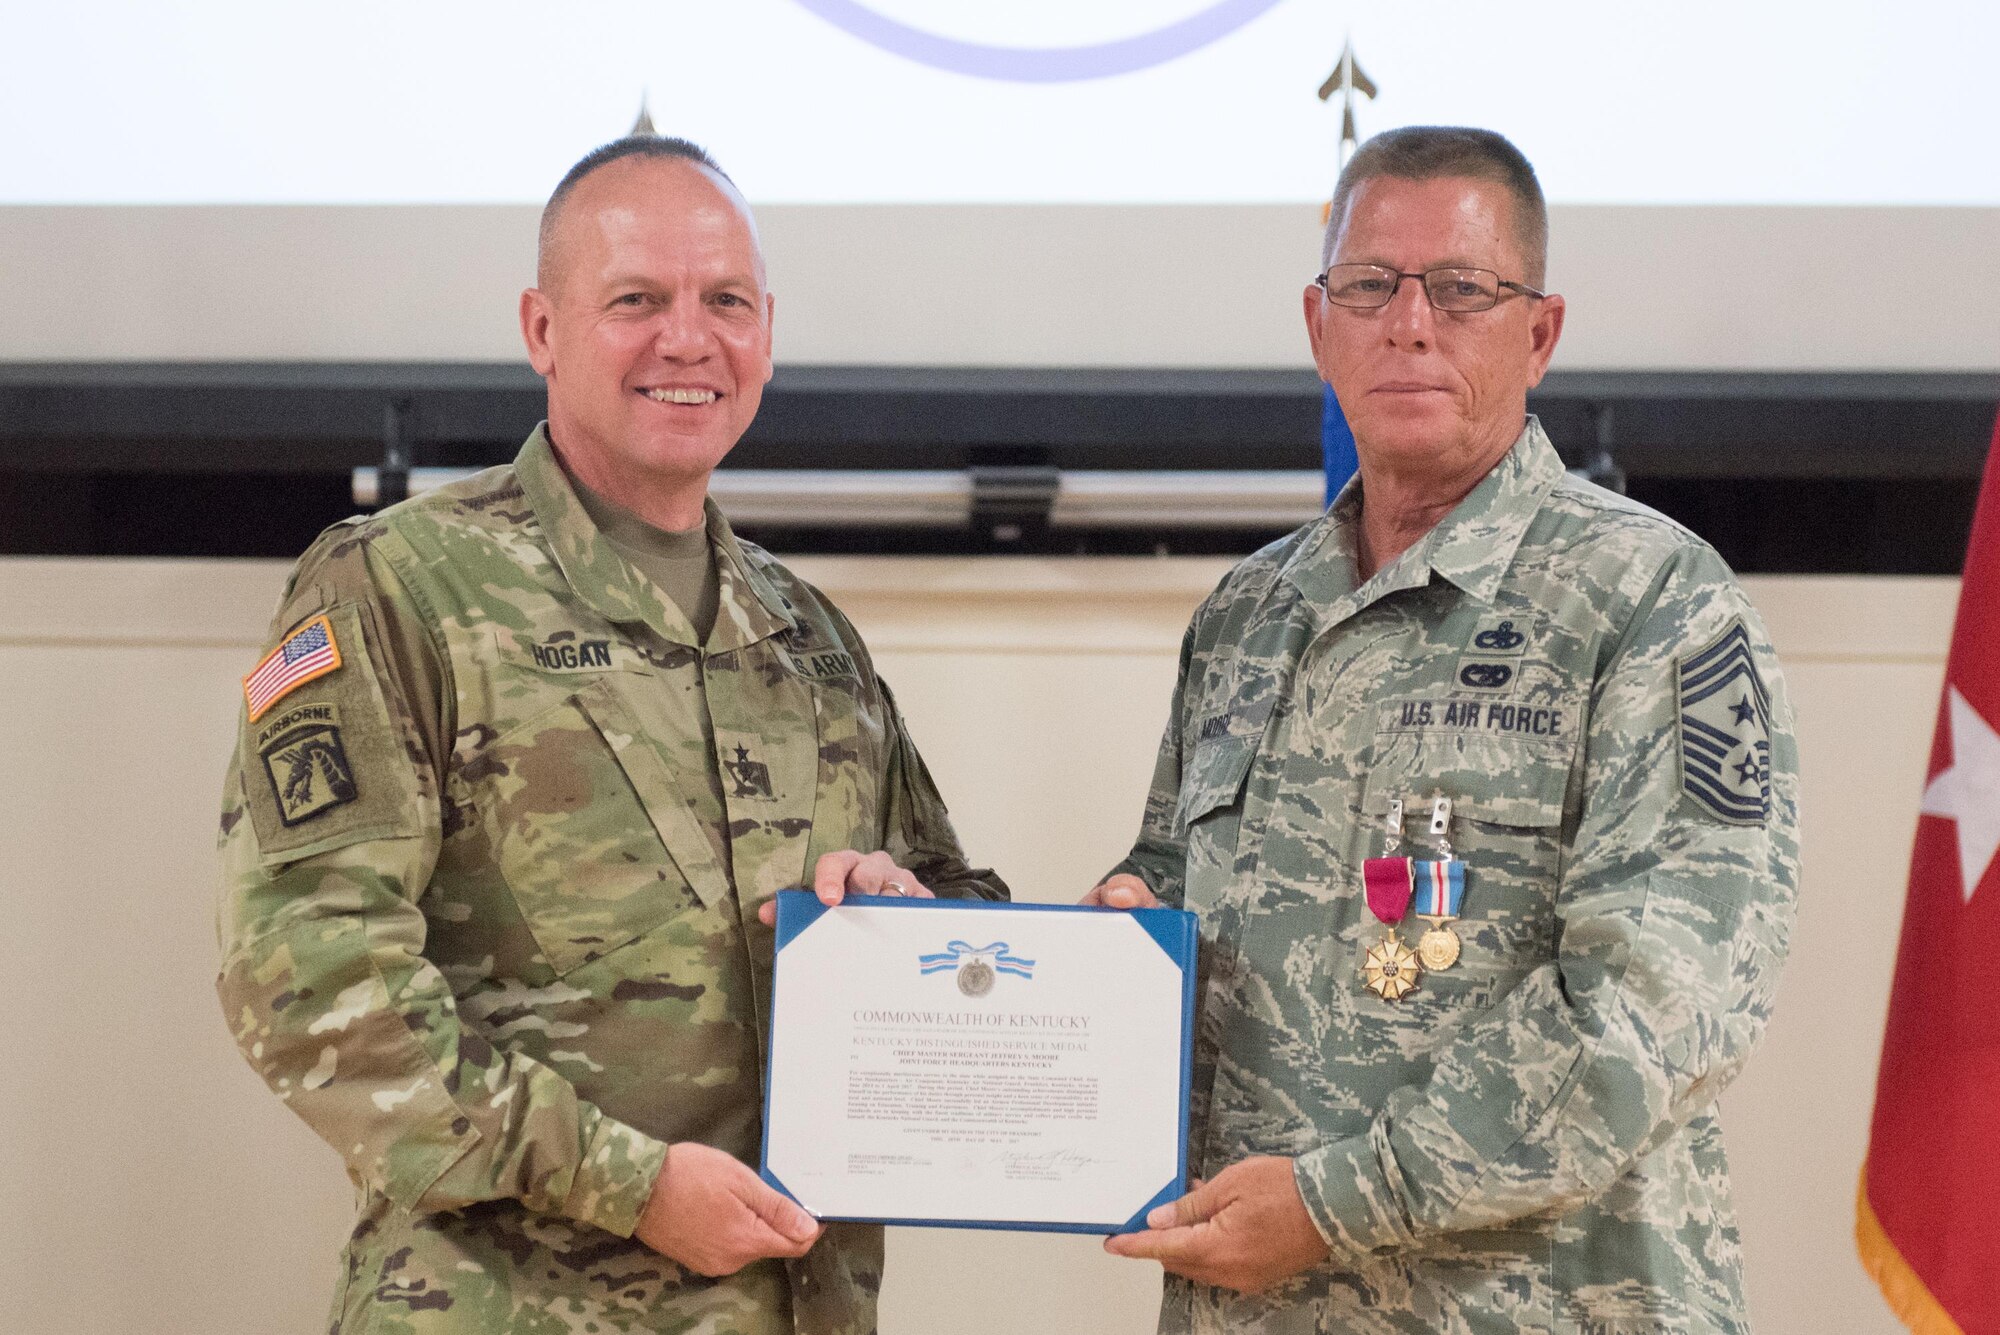 Chief Master Sgt. Jeffrey Moore (right), the outgoing state command chief master sergeant, receives the Distinguished Service Medal from Army Maj. Gen. Stephen Hogan (left), the adjutant general for Kentucky, during Moore’s retirement ceremony at the Kentucky Air National Guard base in Louisville, Ky., on May 20, 2017. Moore is retiring after 35 of service to the Kentucky Air National Guard and United States Air Force. (U.S.  Air National Guard photo by Staff Sgt. Joshua Horton)